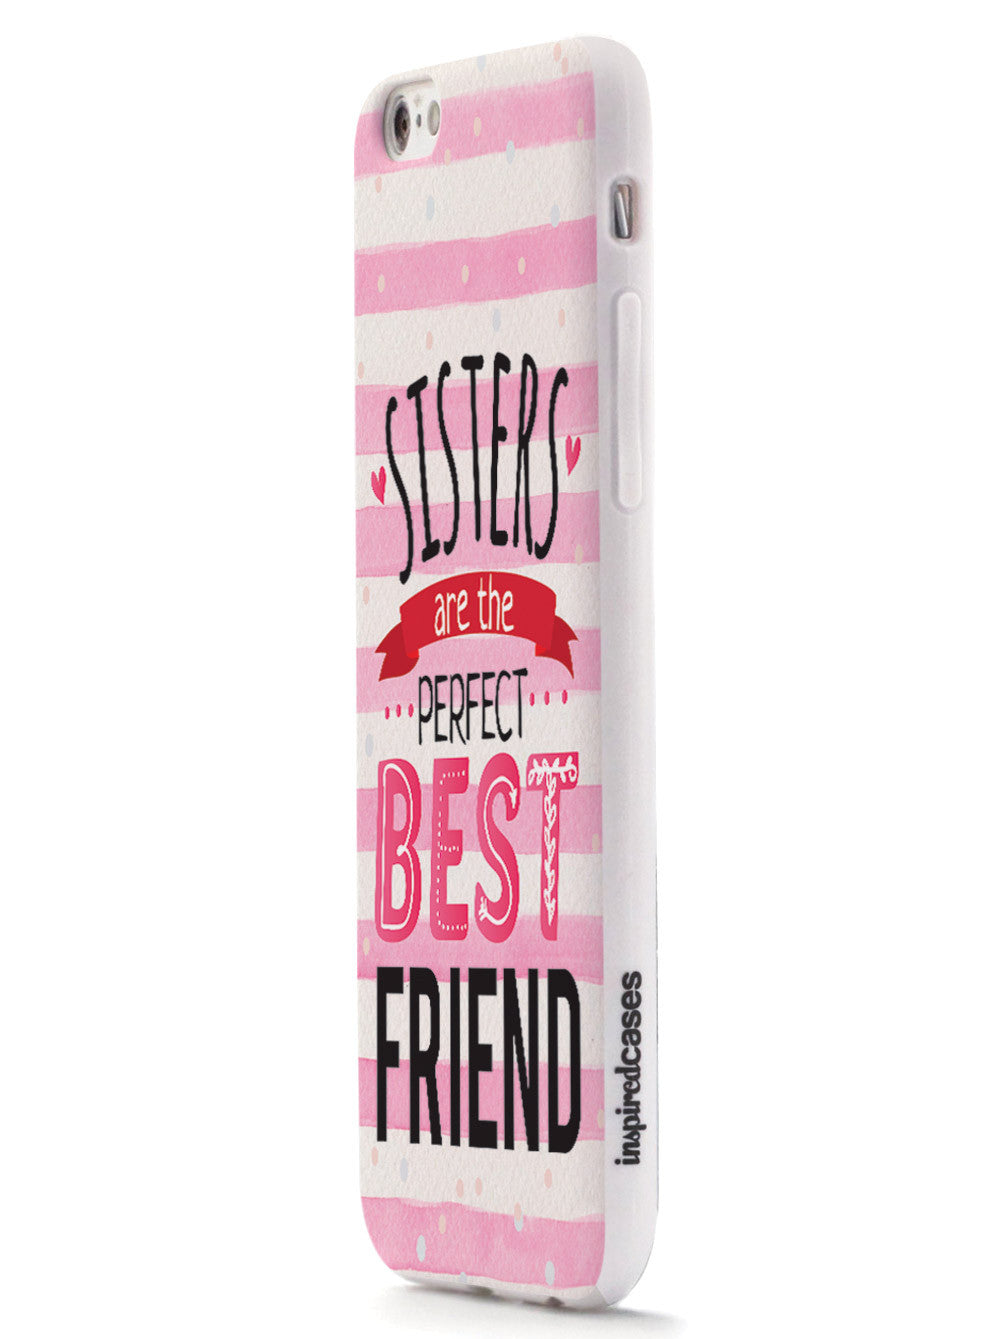 Sisters Are The Perfect Best Friend - White Case